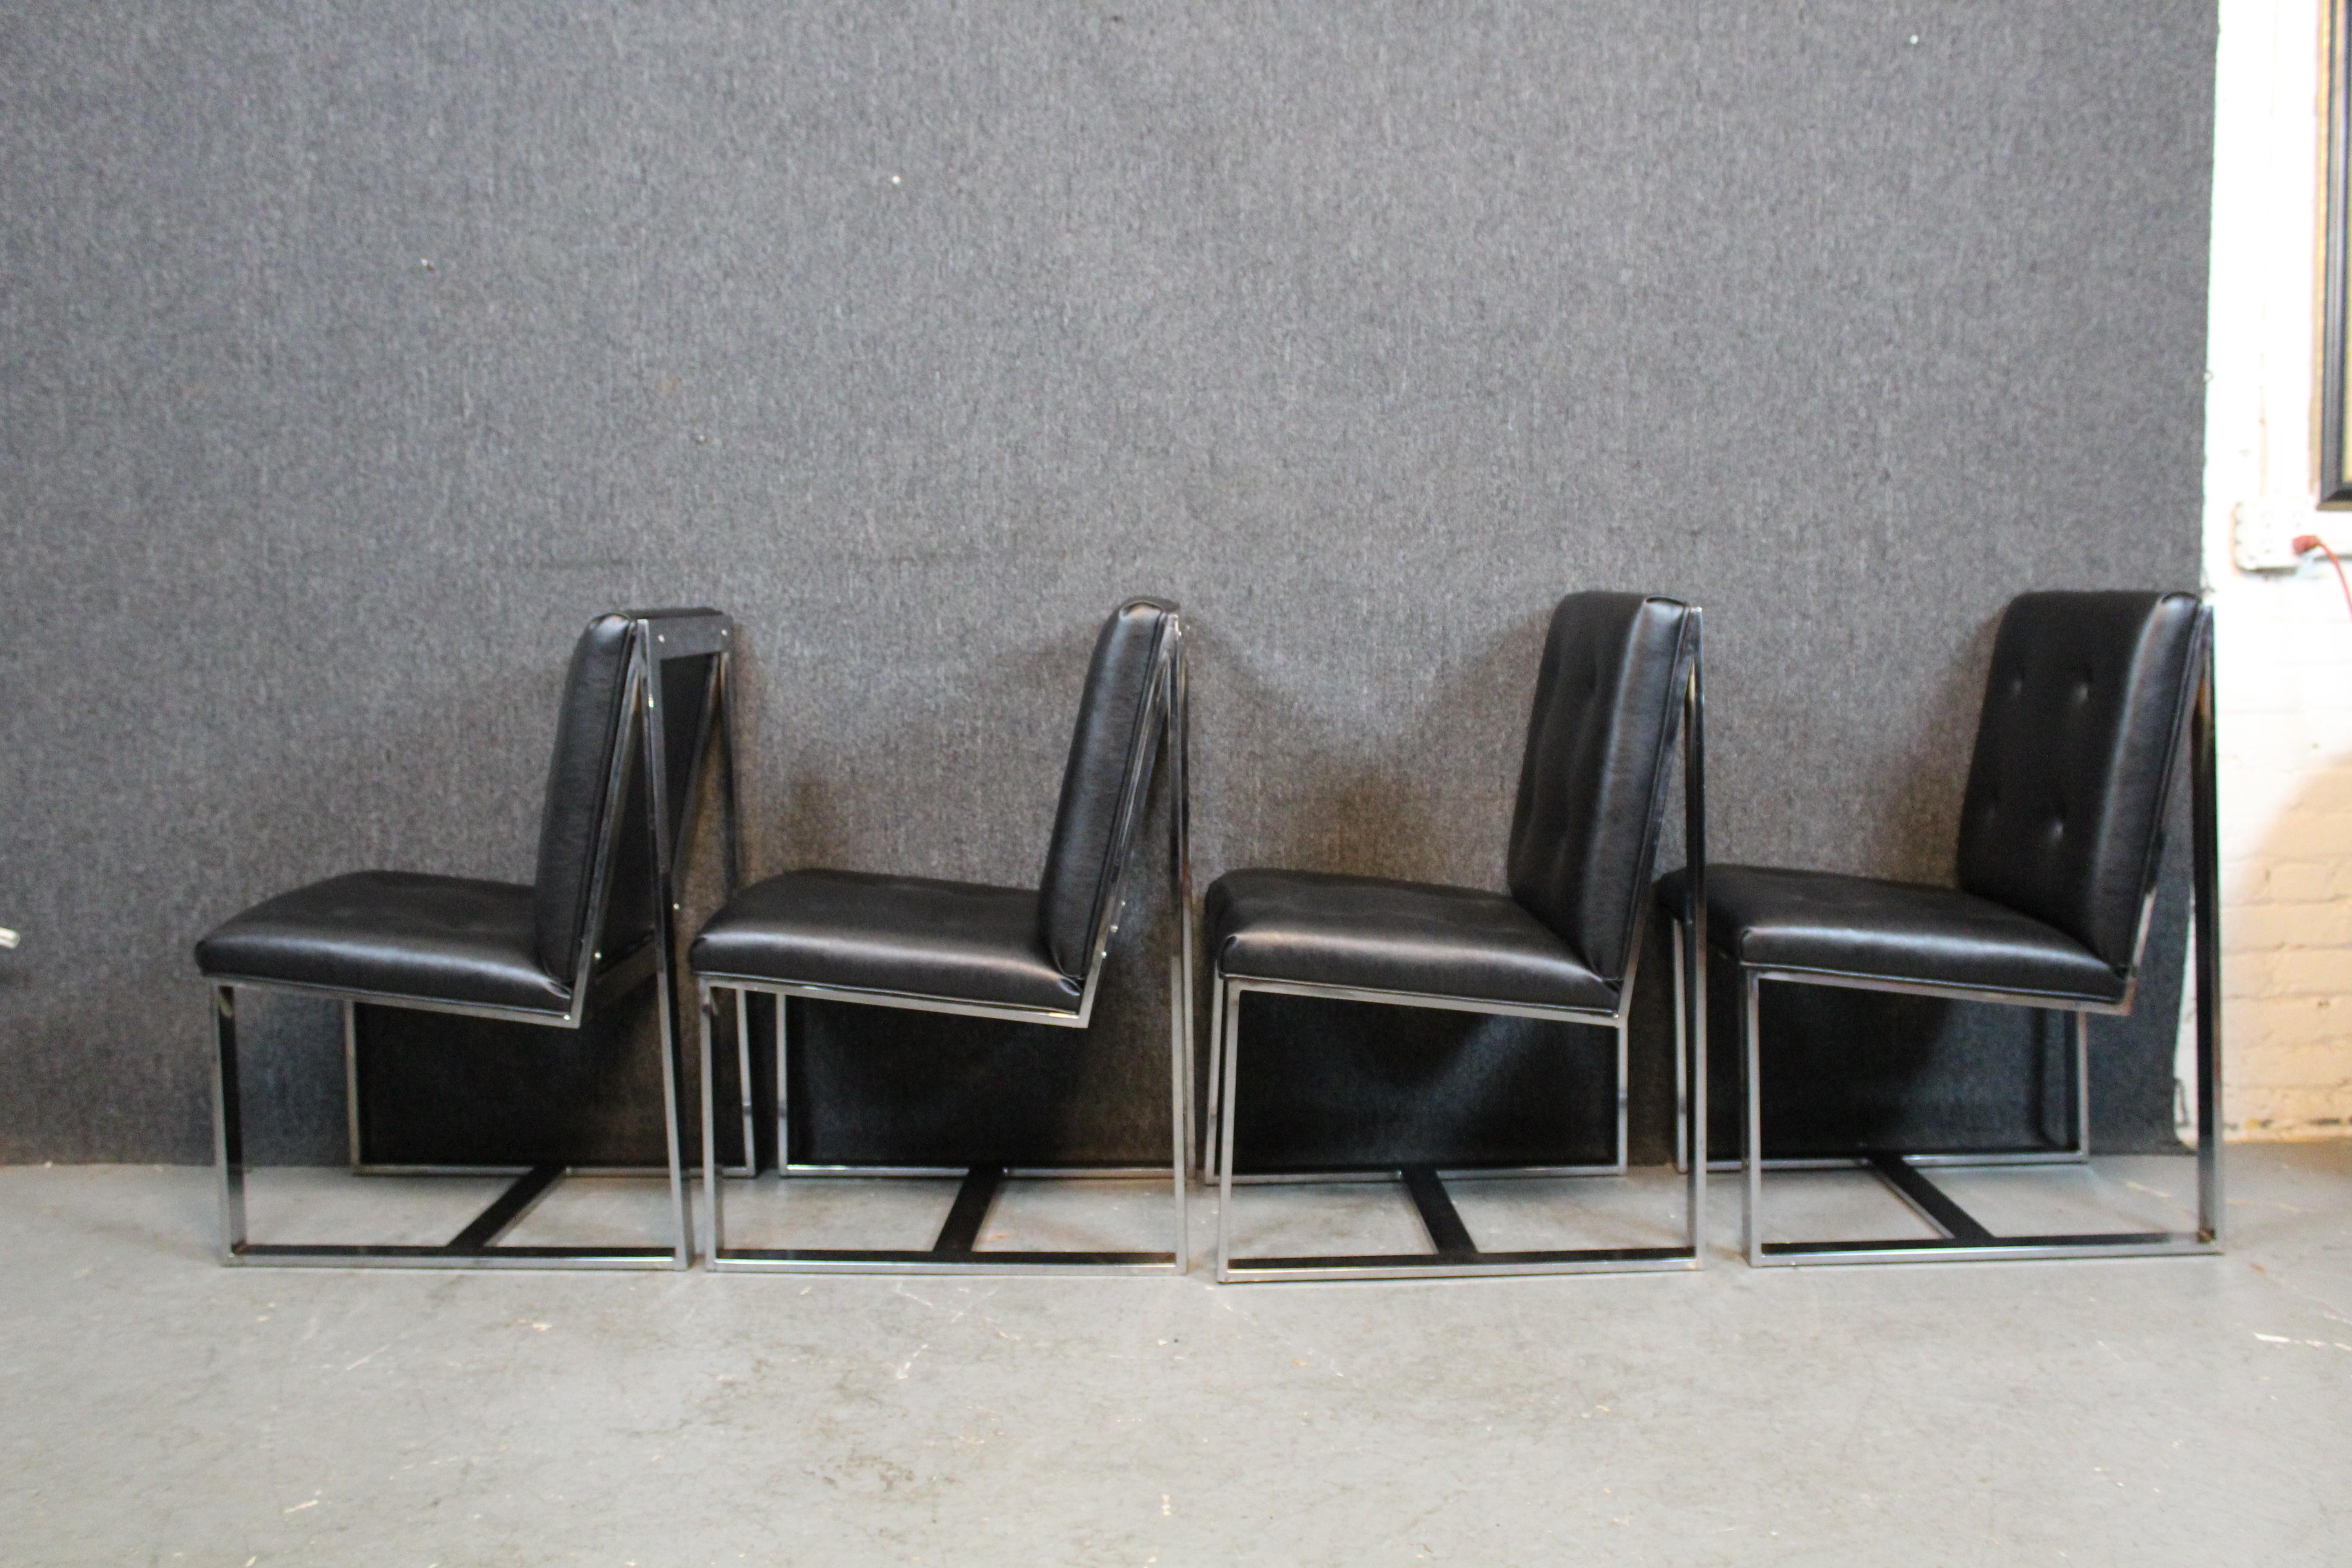 American Set of 4 Chrome Flat Bar Dining Chairs by Milo Baughman for Thayer Coggin For Sale